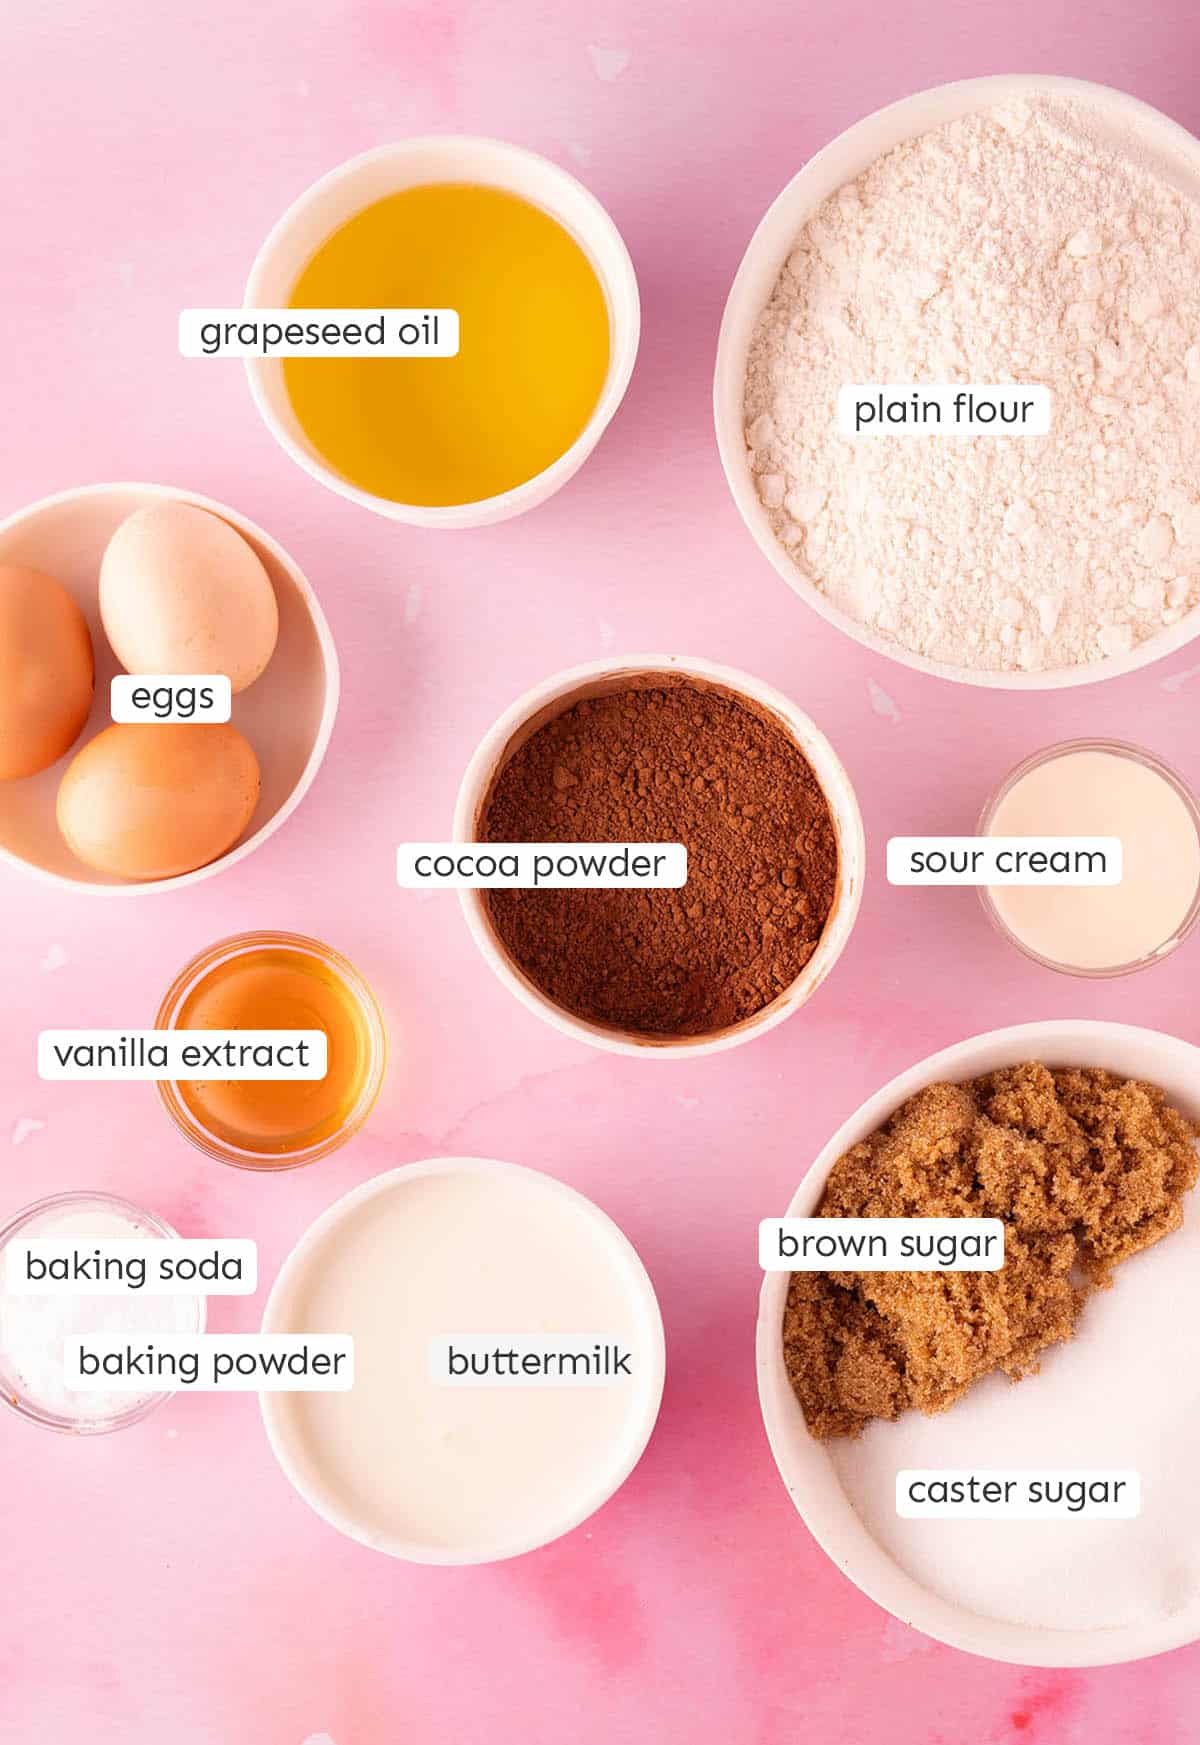 All the ingredients need to make chocolate sponge from scratch.